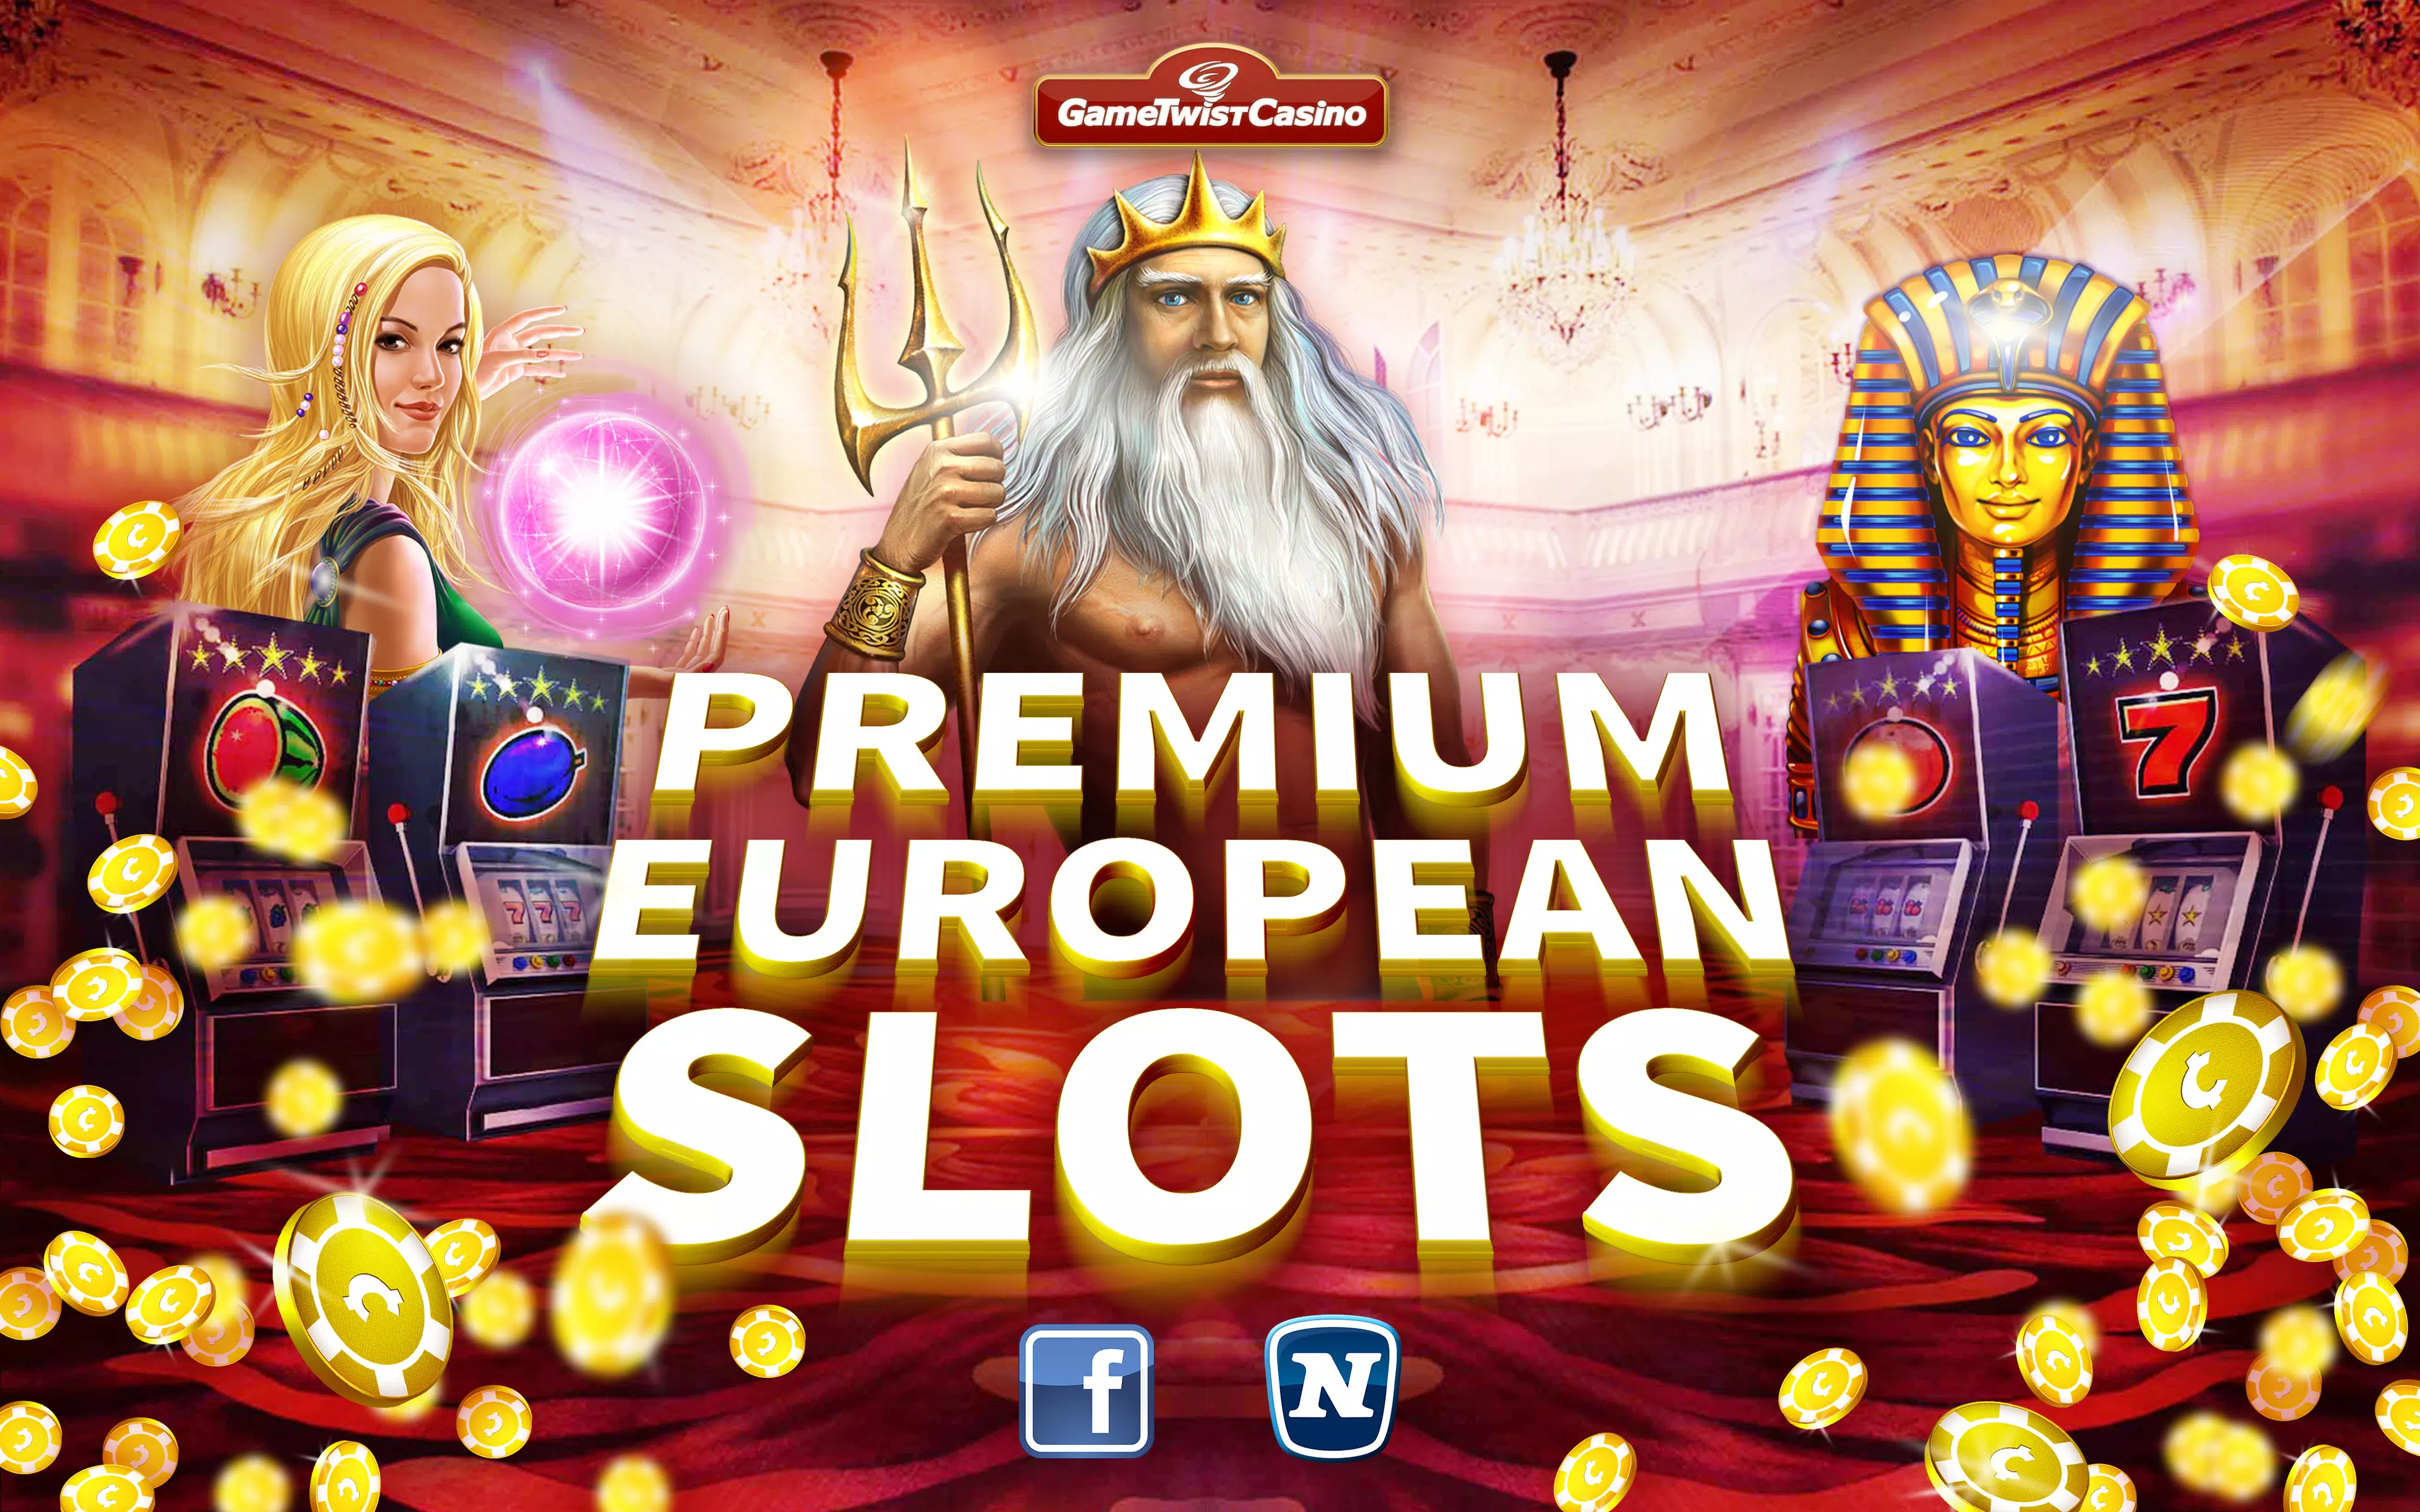 GameTwist Vegas Casino Slots - APK Download for Android